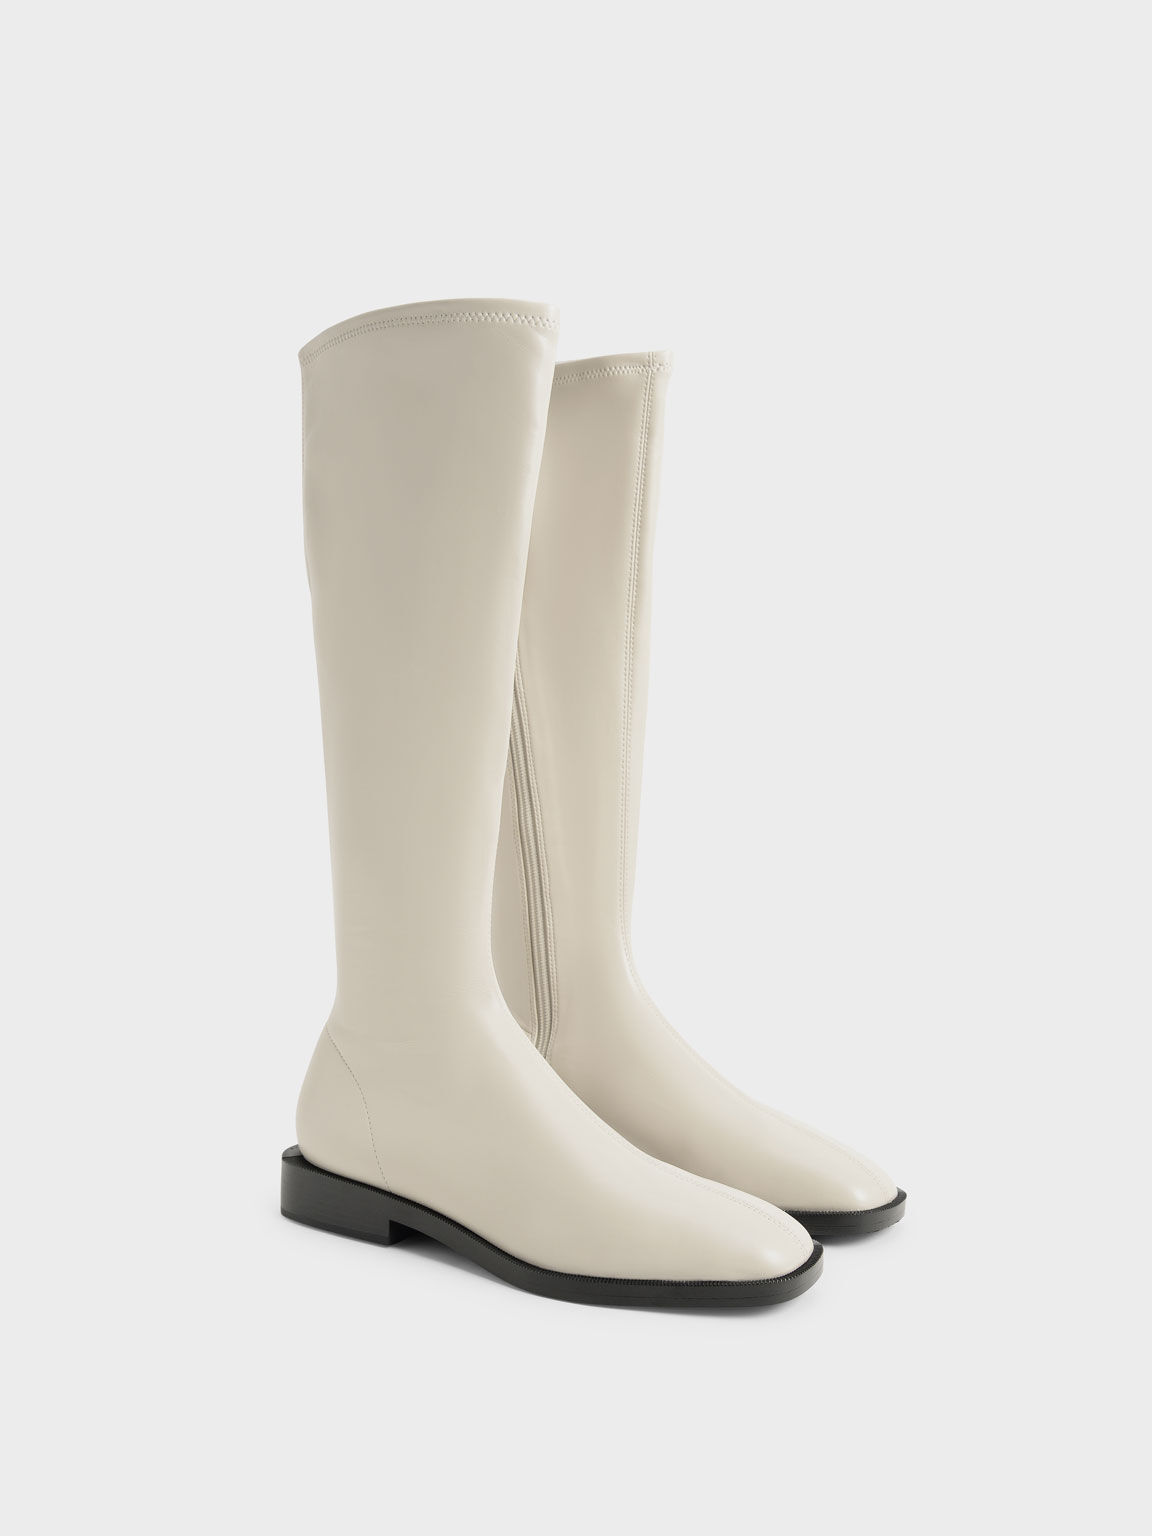 Chalk Knee High Flat Boots - CHARLES & KEITH NL